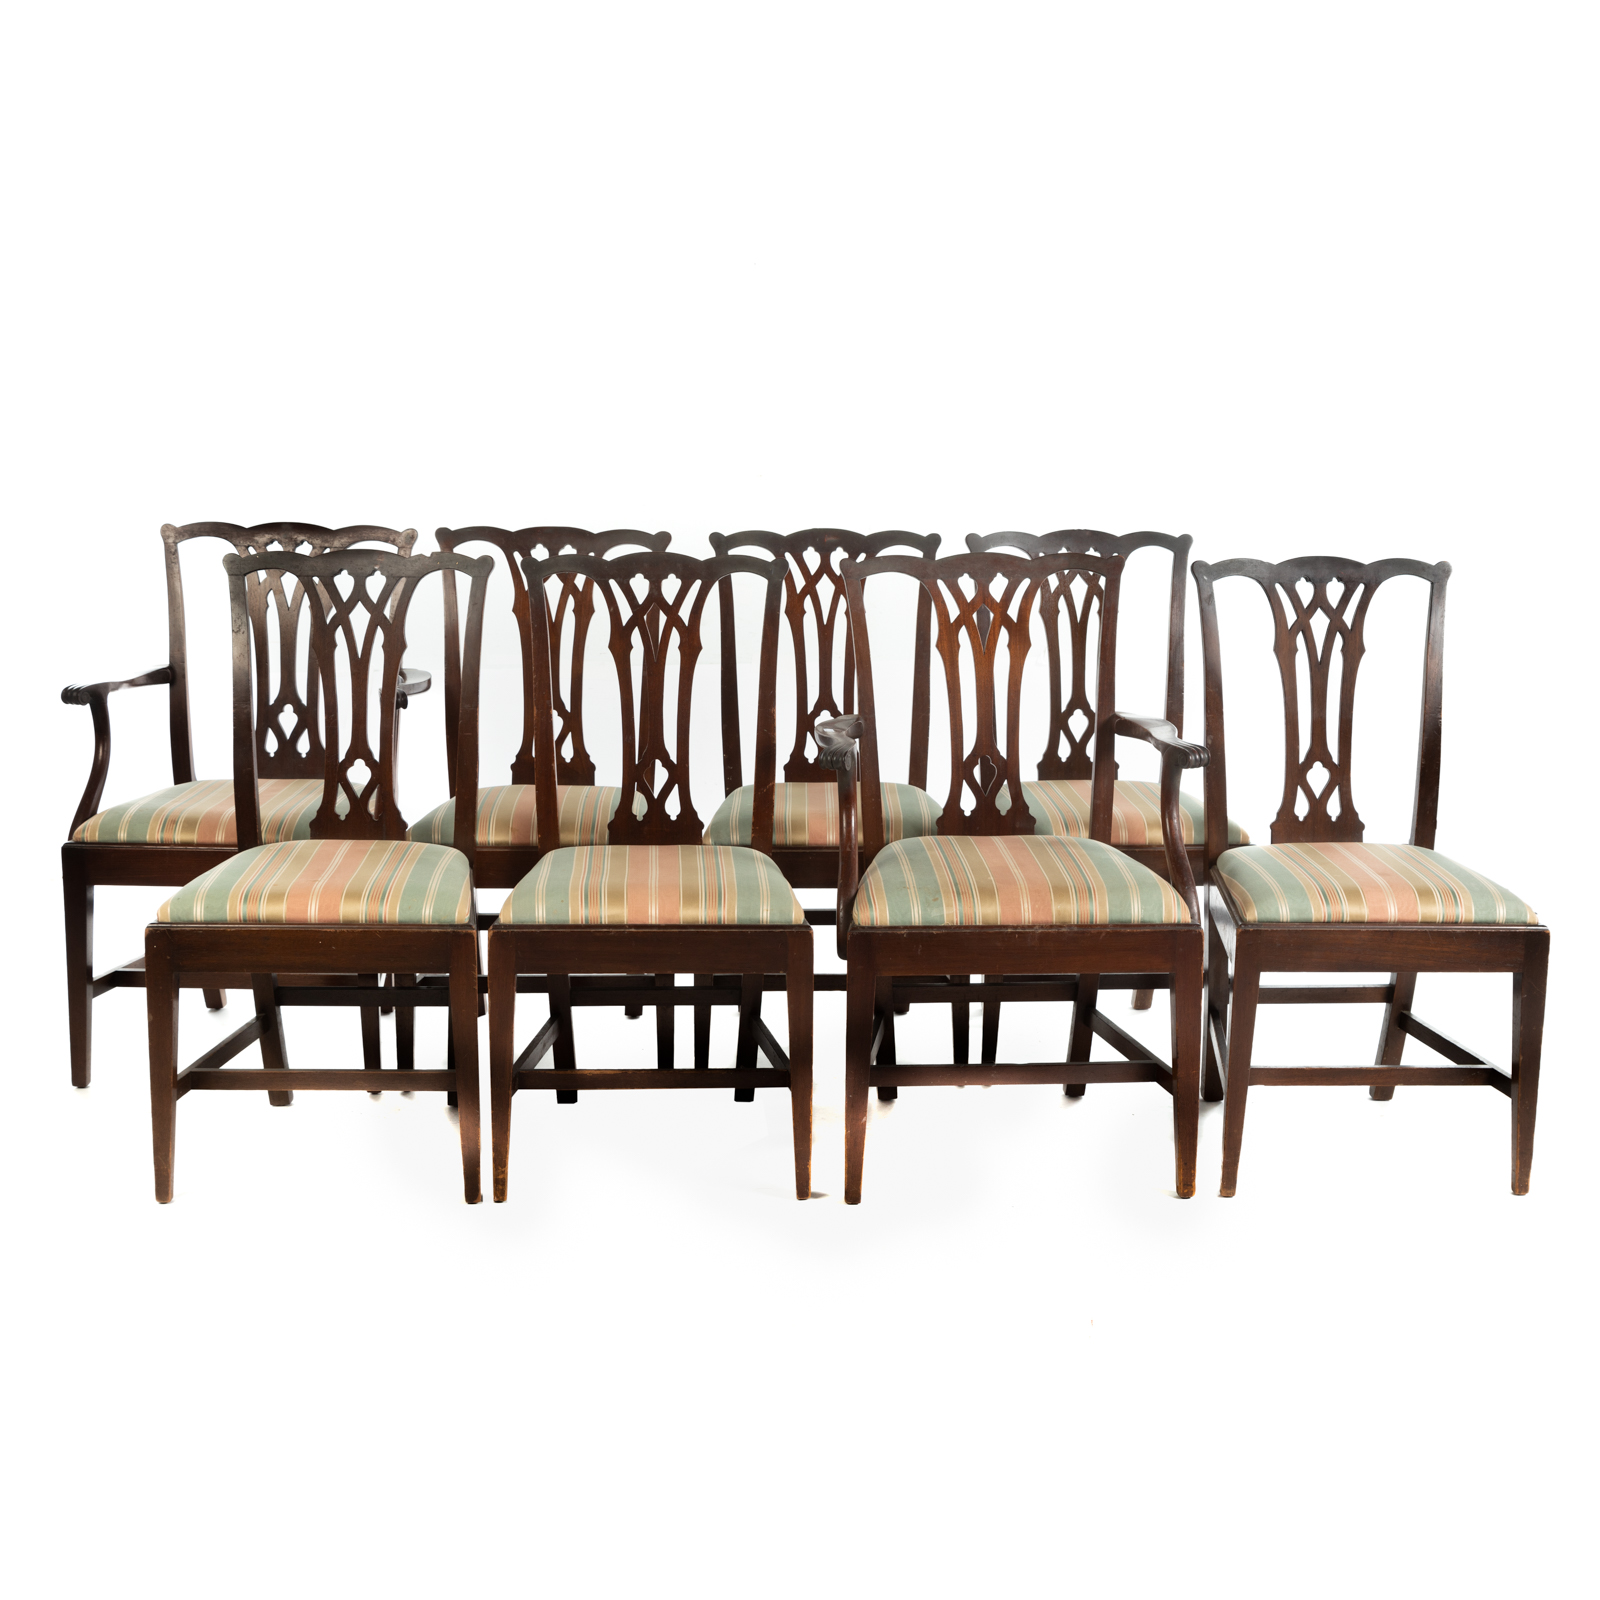 EIGHT CHIPPENDALE MAHOGANY STYLE 36a99a